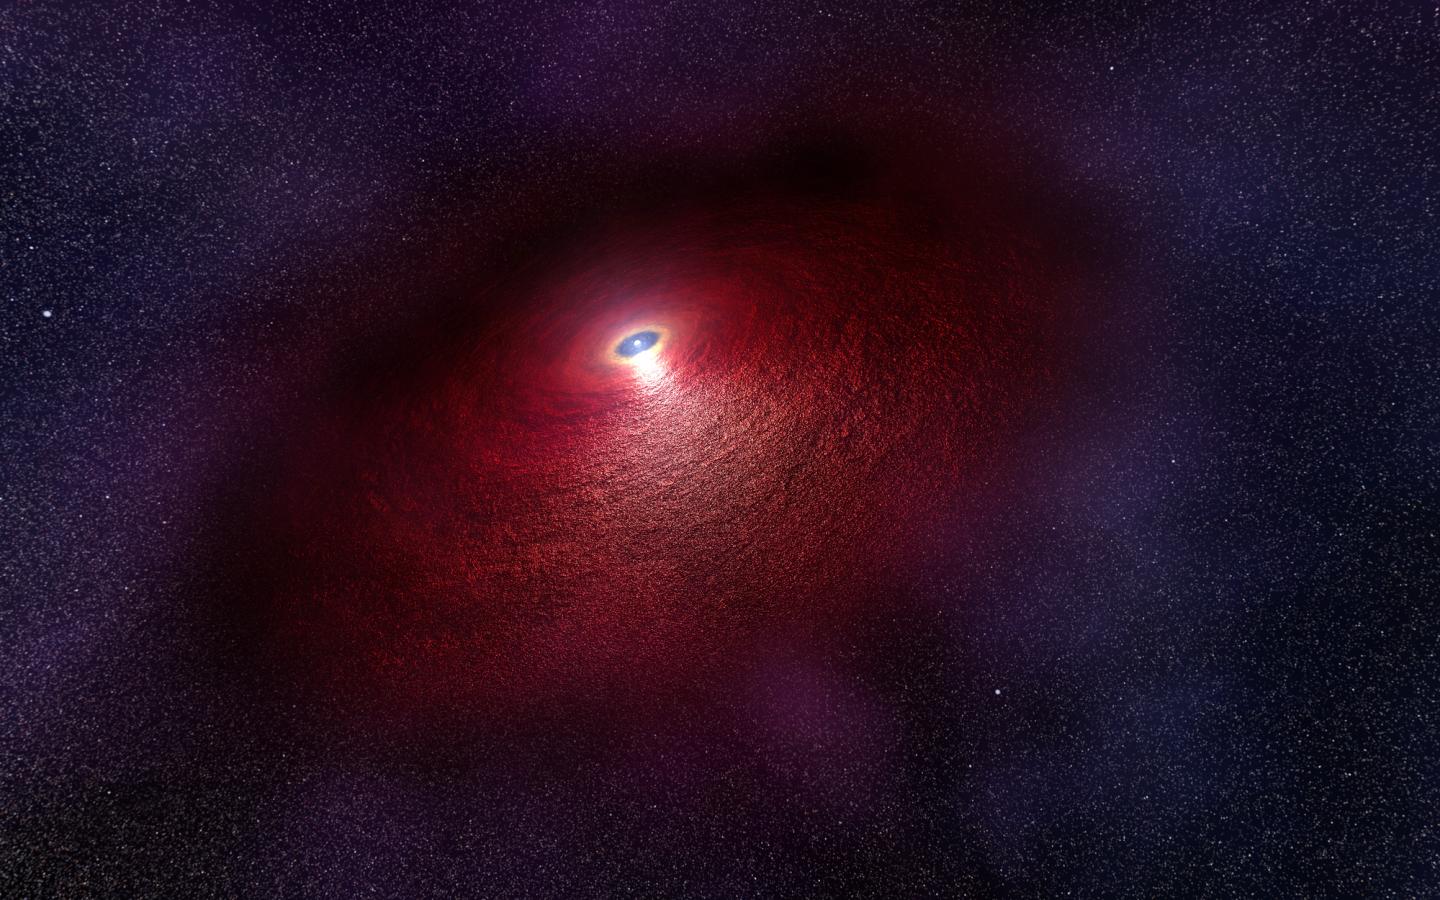 Big breakthrough: Neutron Star with awakening dusky disk discovered by Hubble